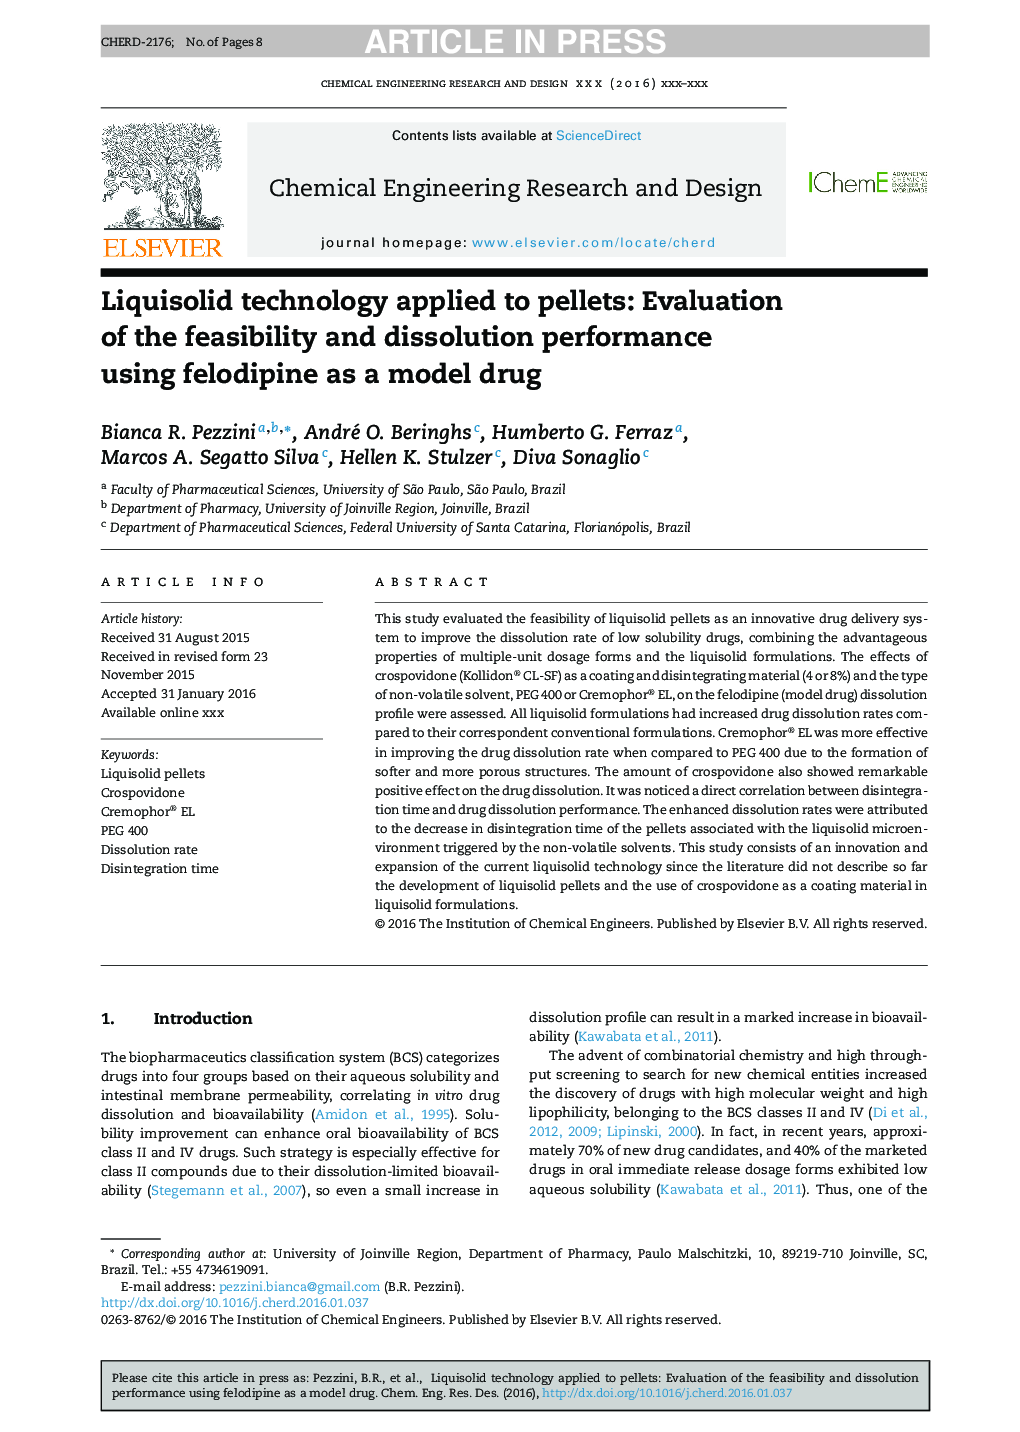 Liquisolid technology applied to pellets: Evaluation of the feasibility and dissolution performance using felodipine as a model drug